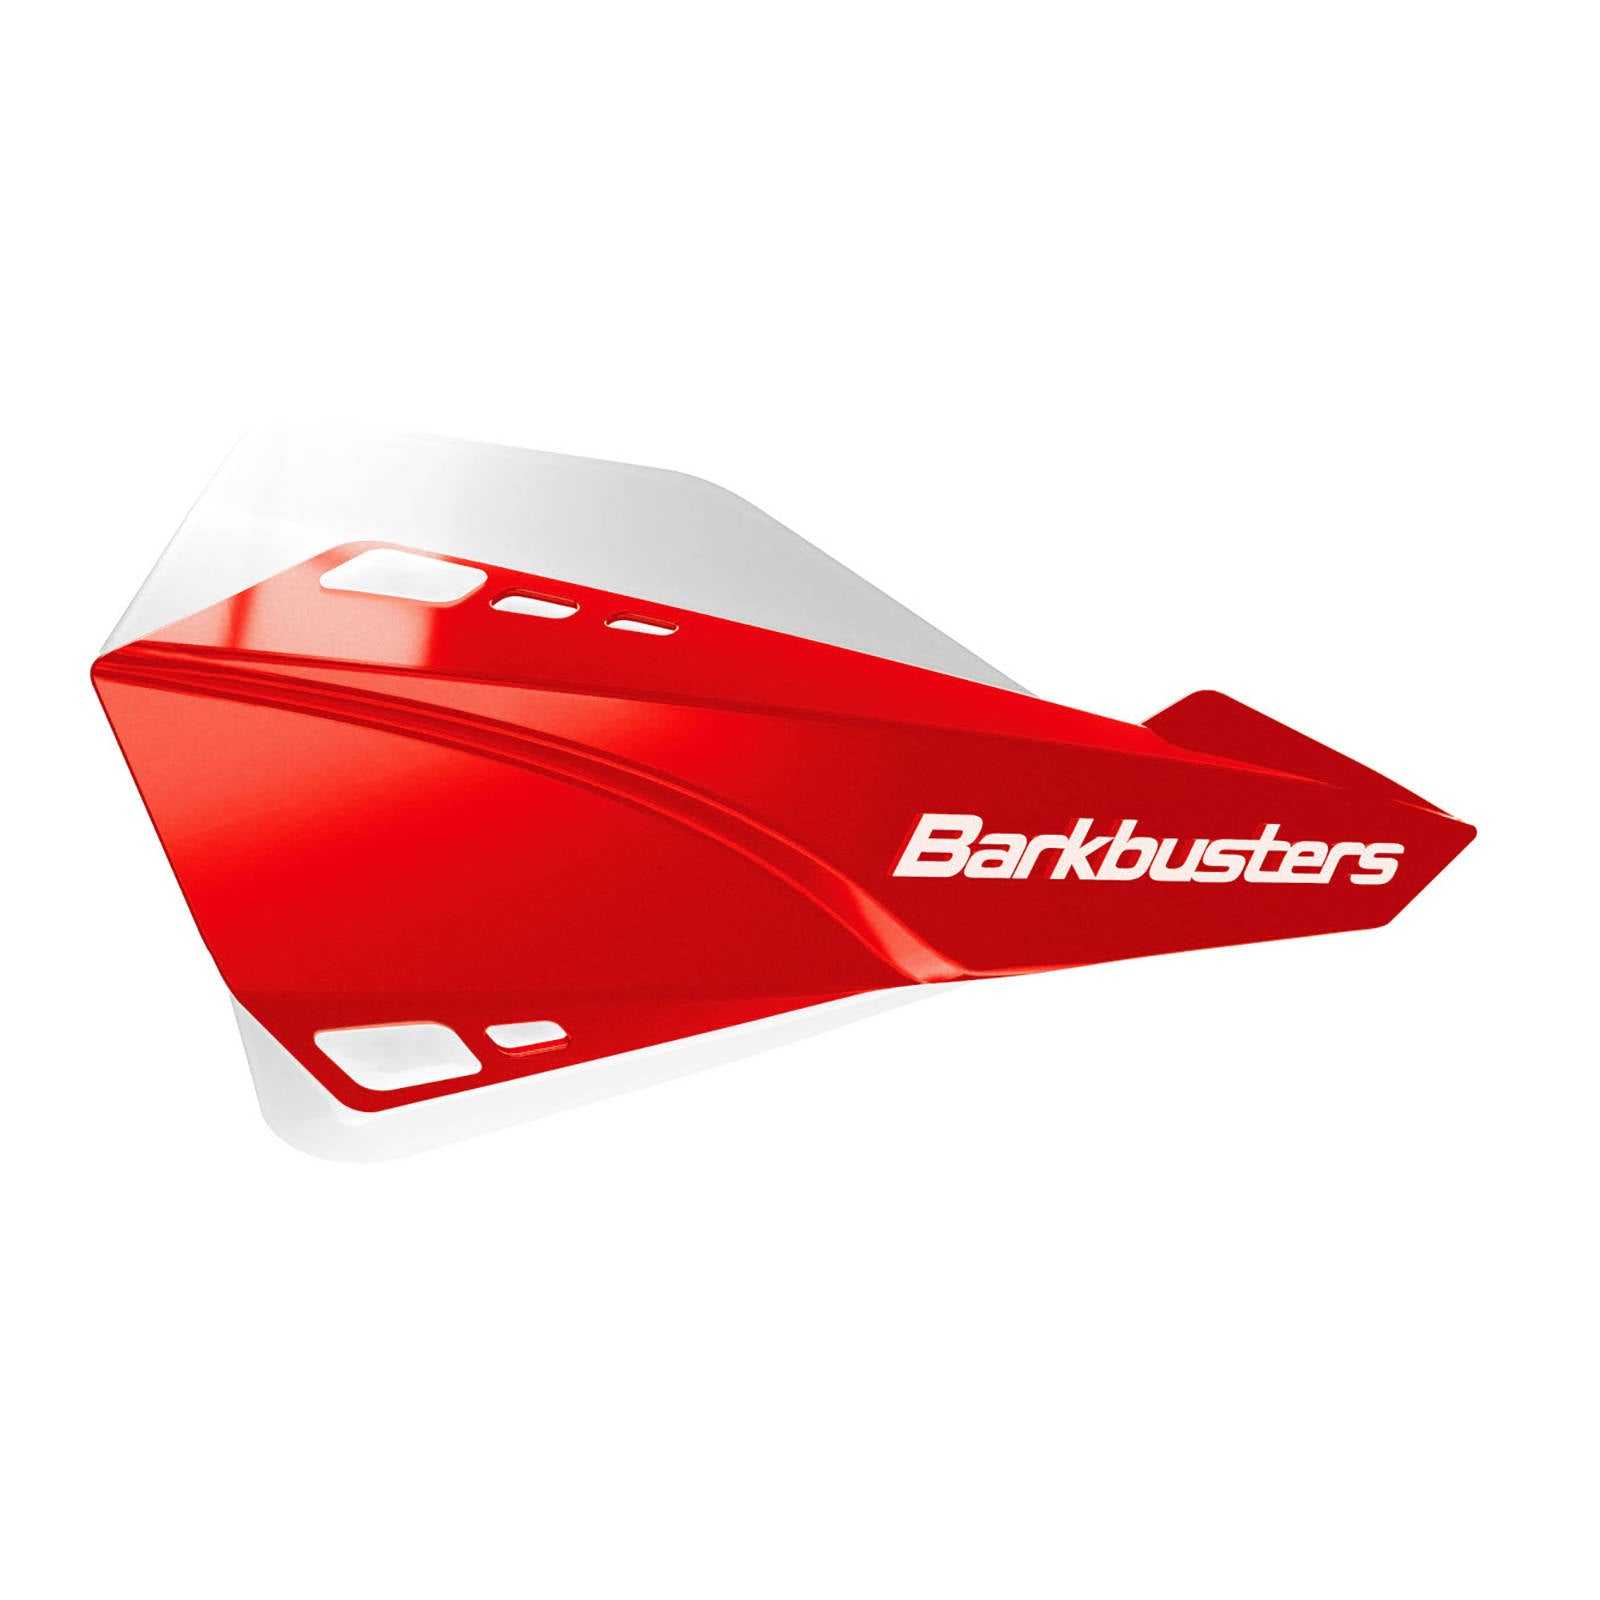 Barkbusters, Barkbusters Handguard Sabre Open - Red / White